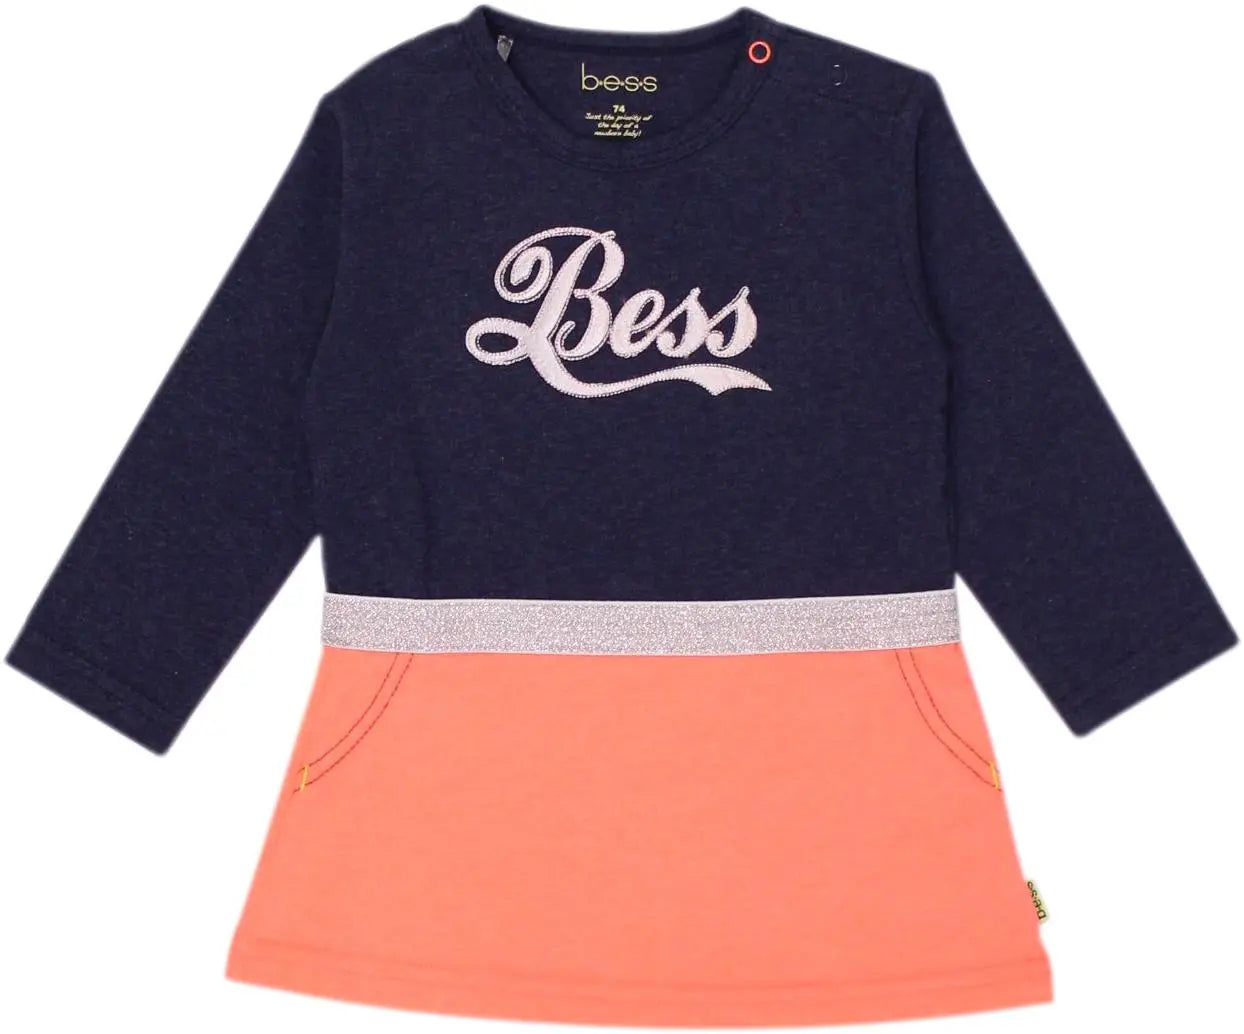 Bess - BLUE10502- ThriftTale.com - Vintage and second handclothing